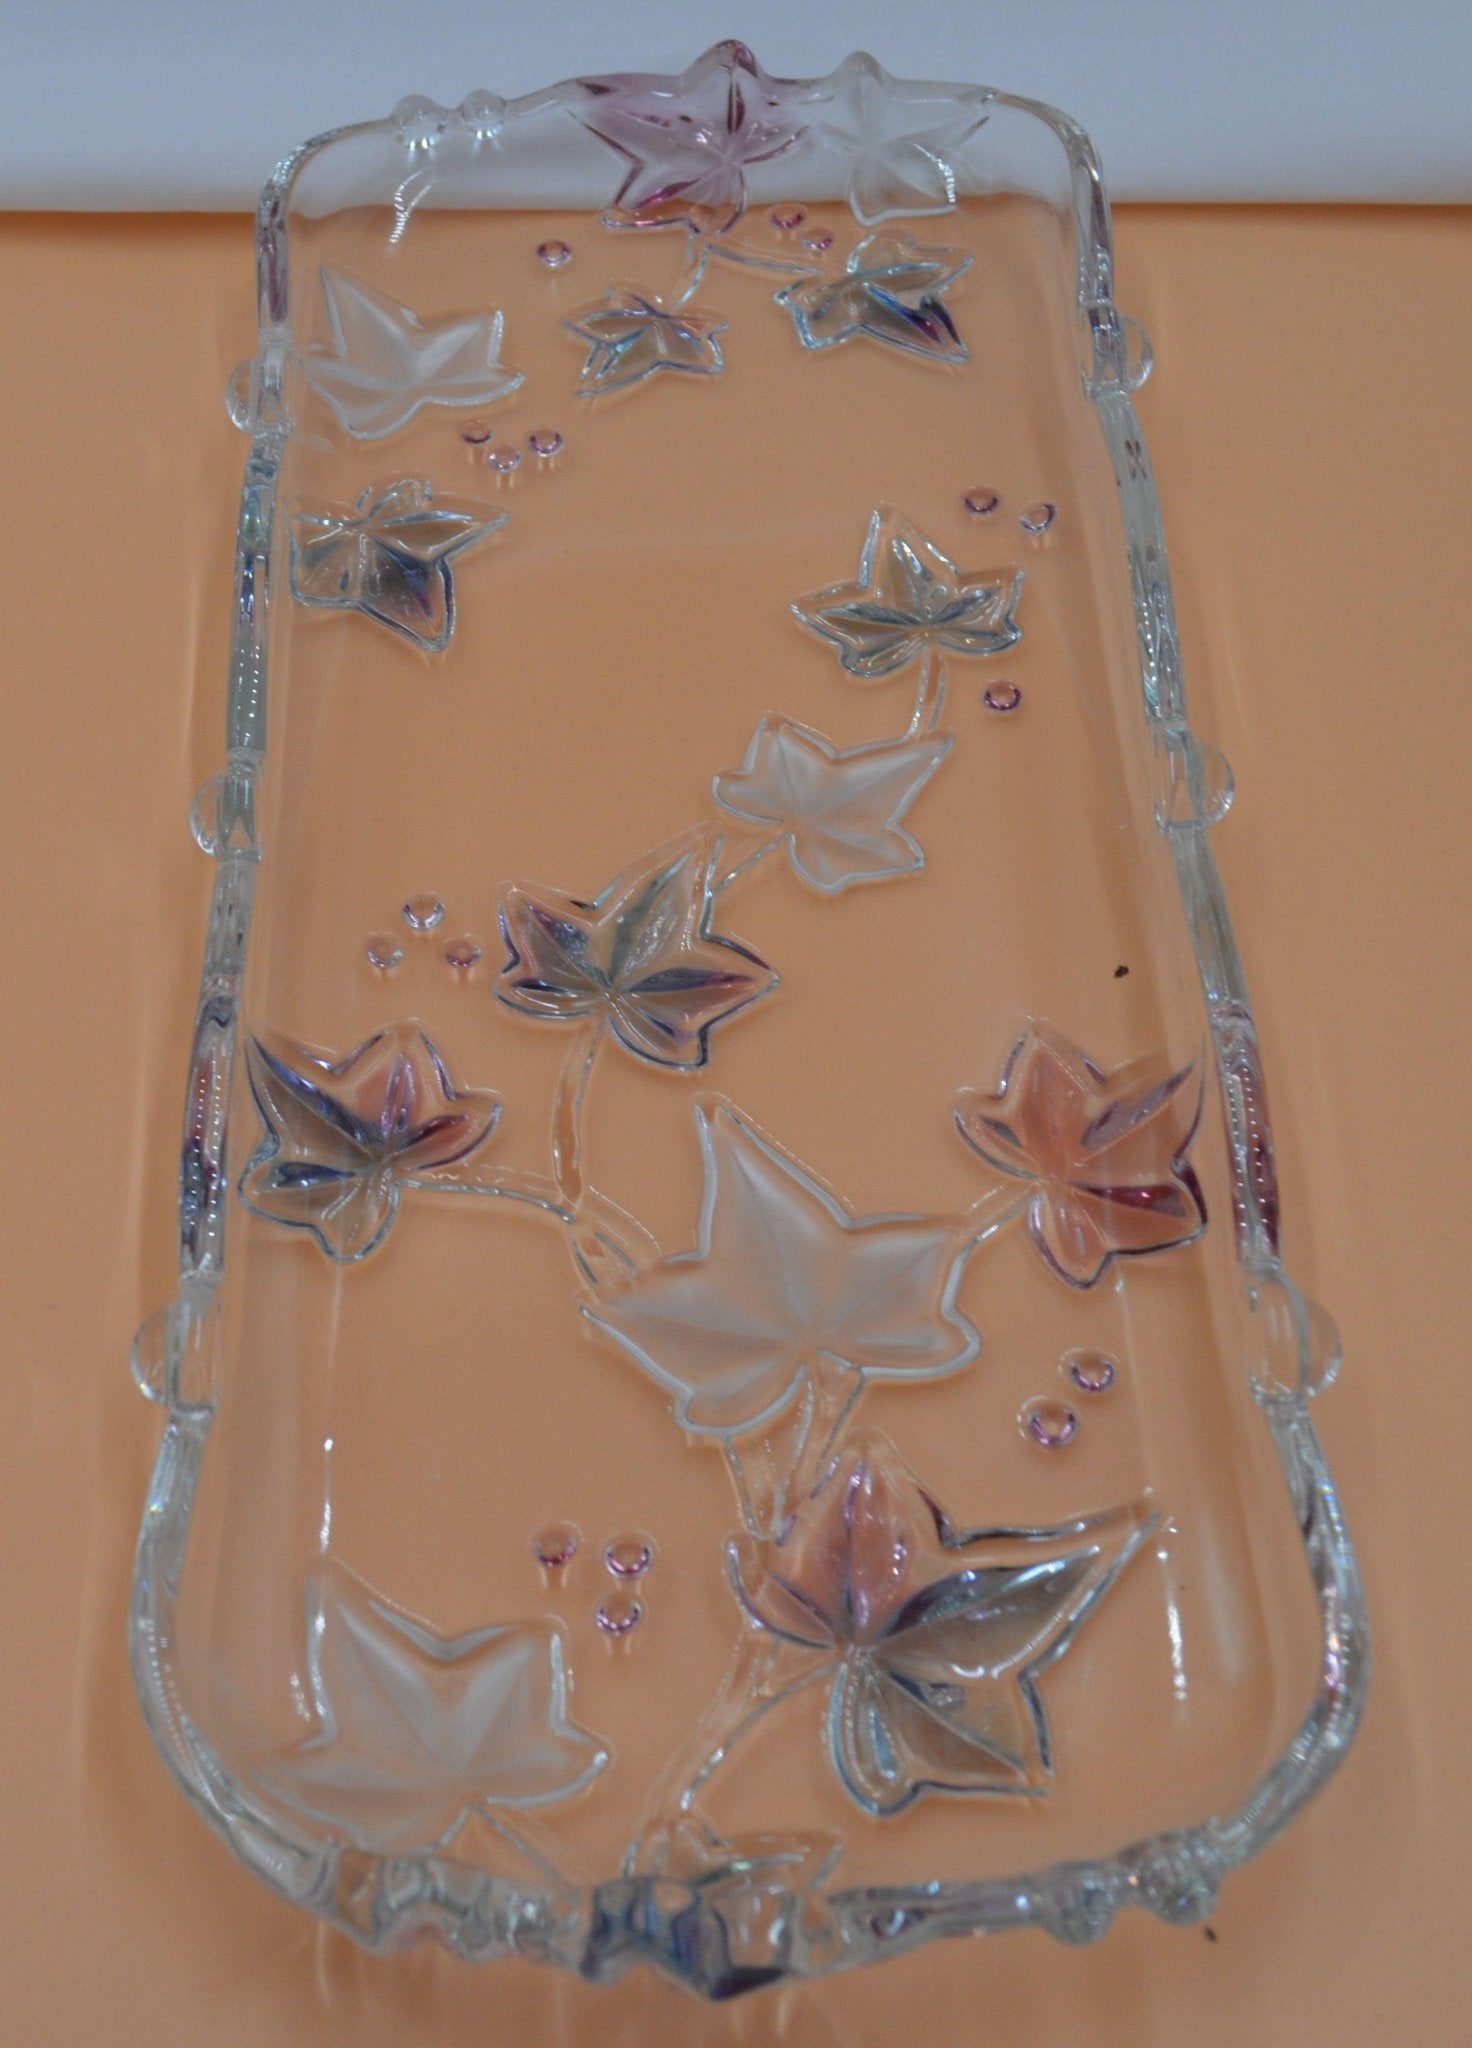 TABLEWARE GLASS SERVING TRAY WITH IVY LEAF DESIGN - TMD167207